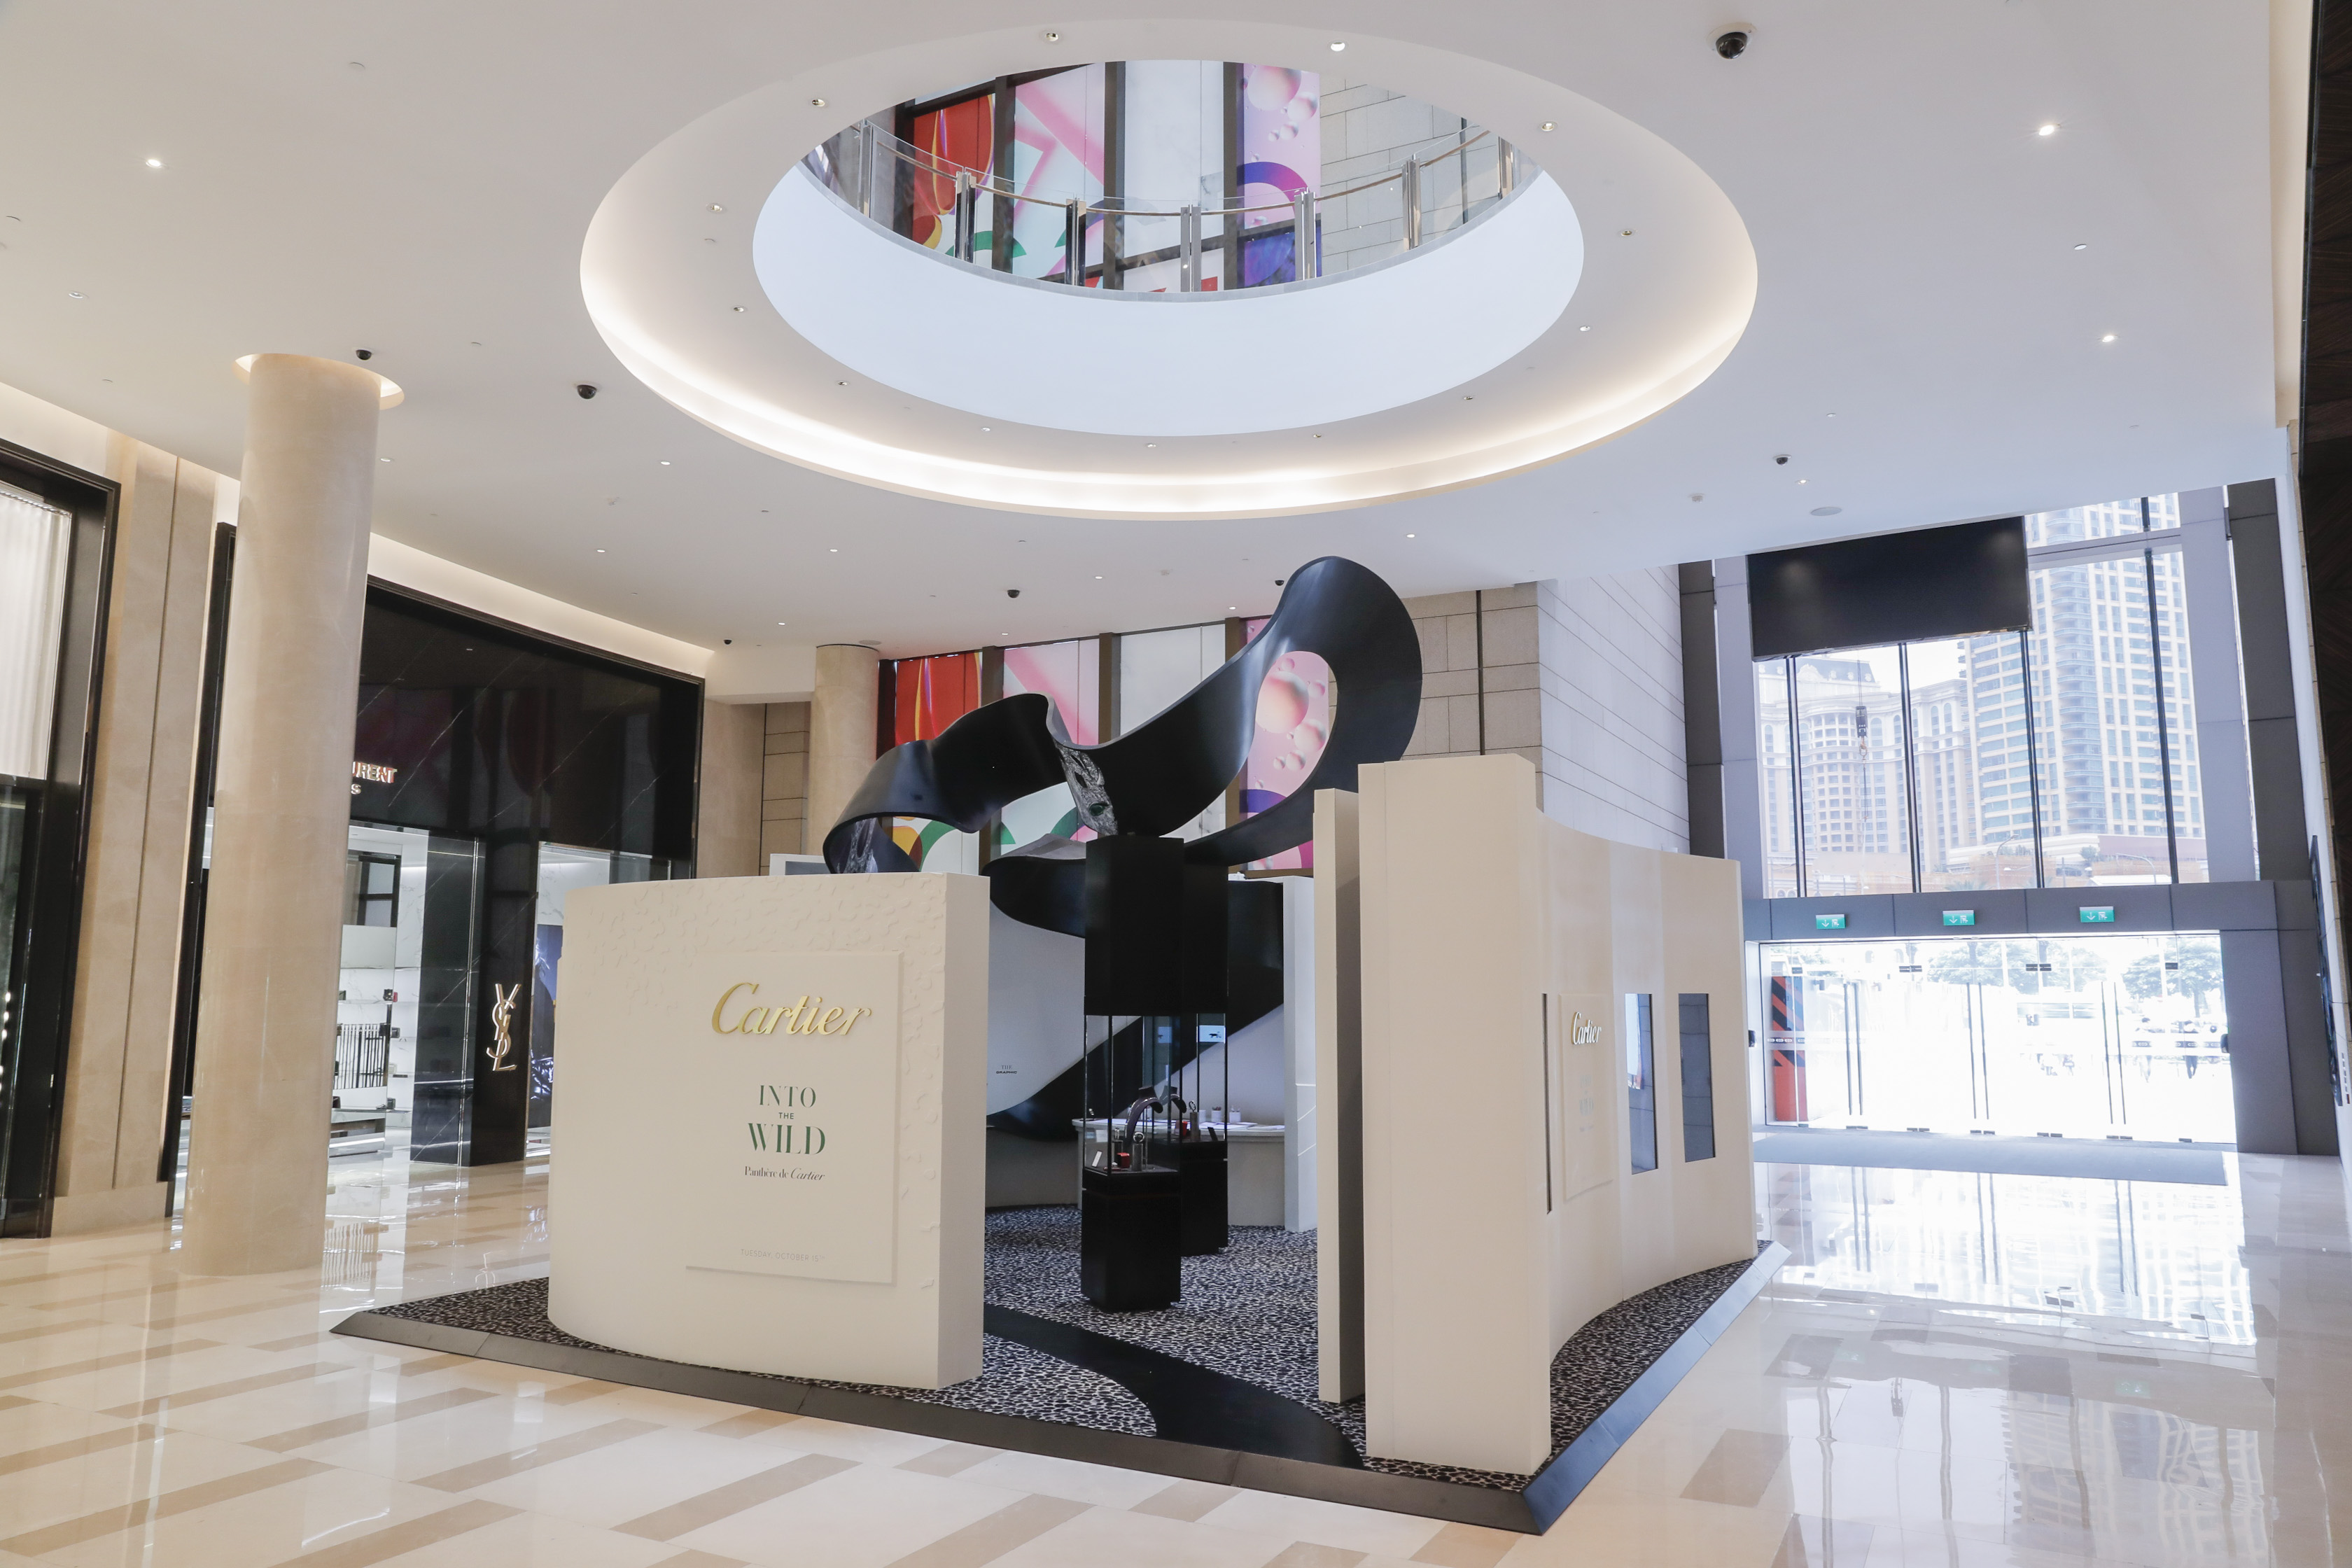 T Galleria by DFS store will open in The Londoner Macau this November